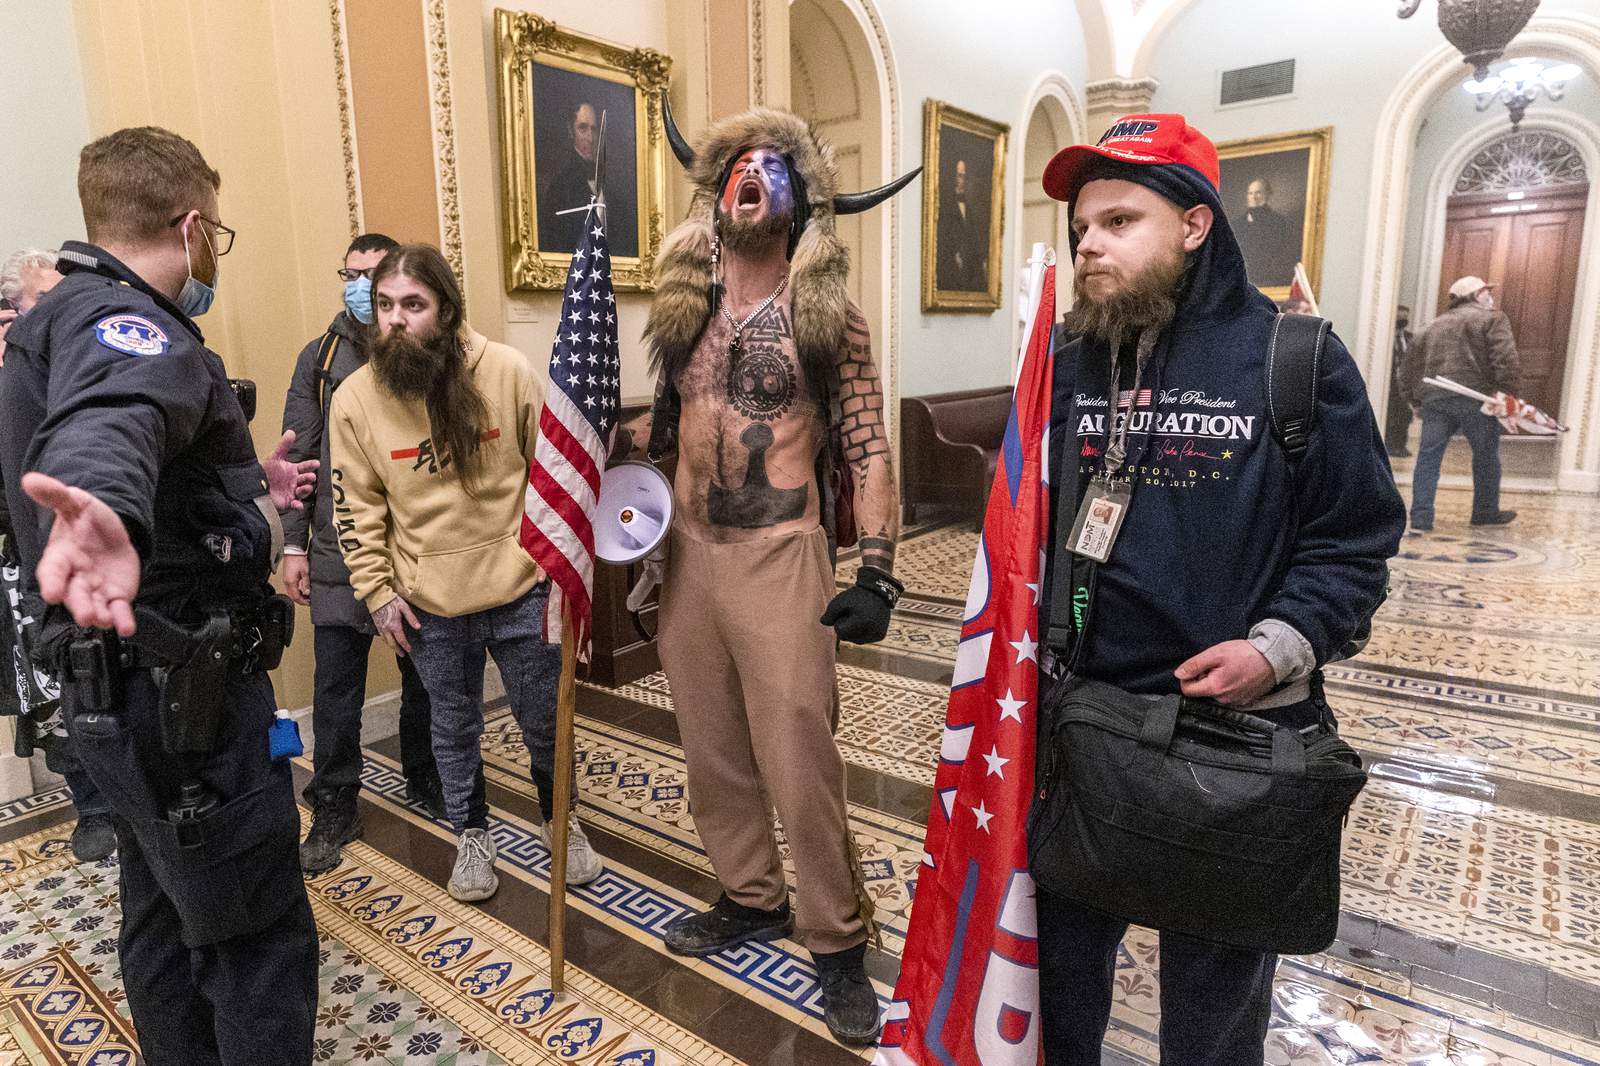 ‘QAnon Shaman’ accused of storming Capitol will be fed organic food in jail, judge rules